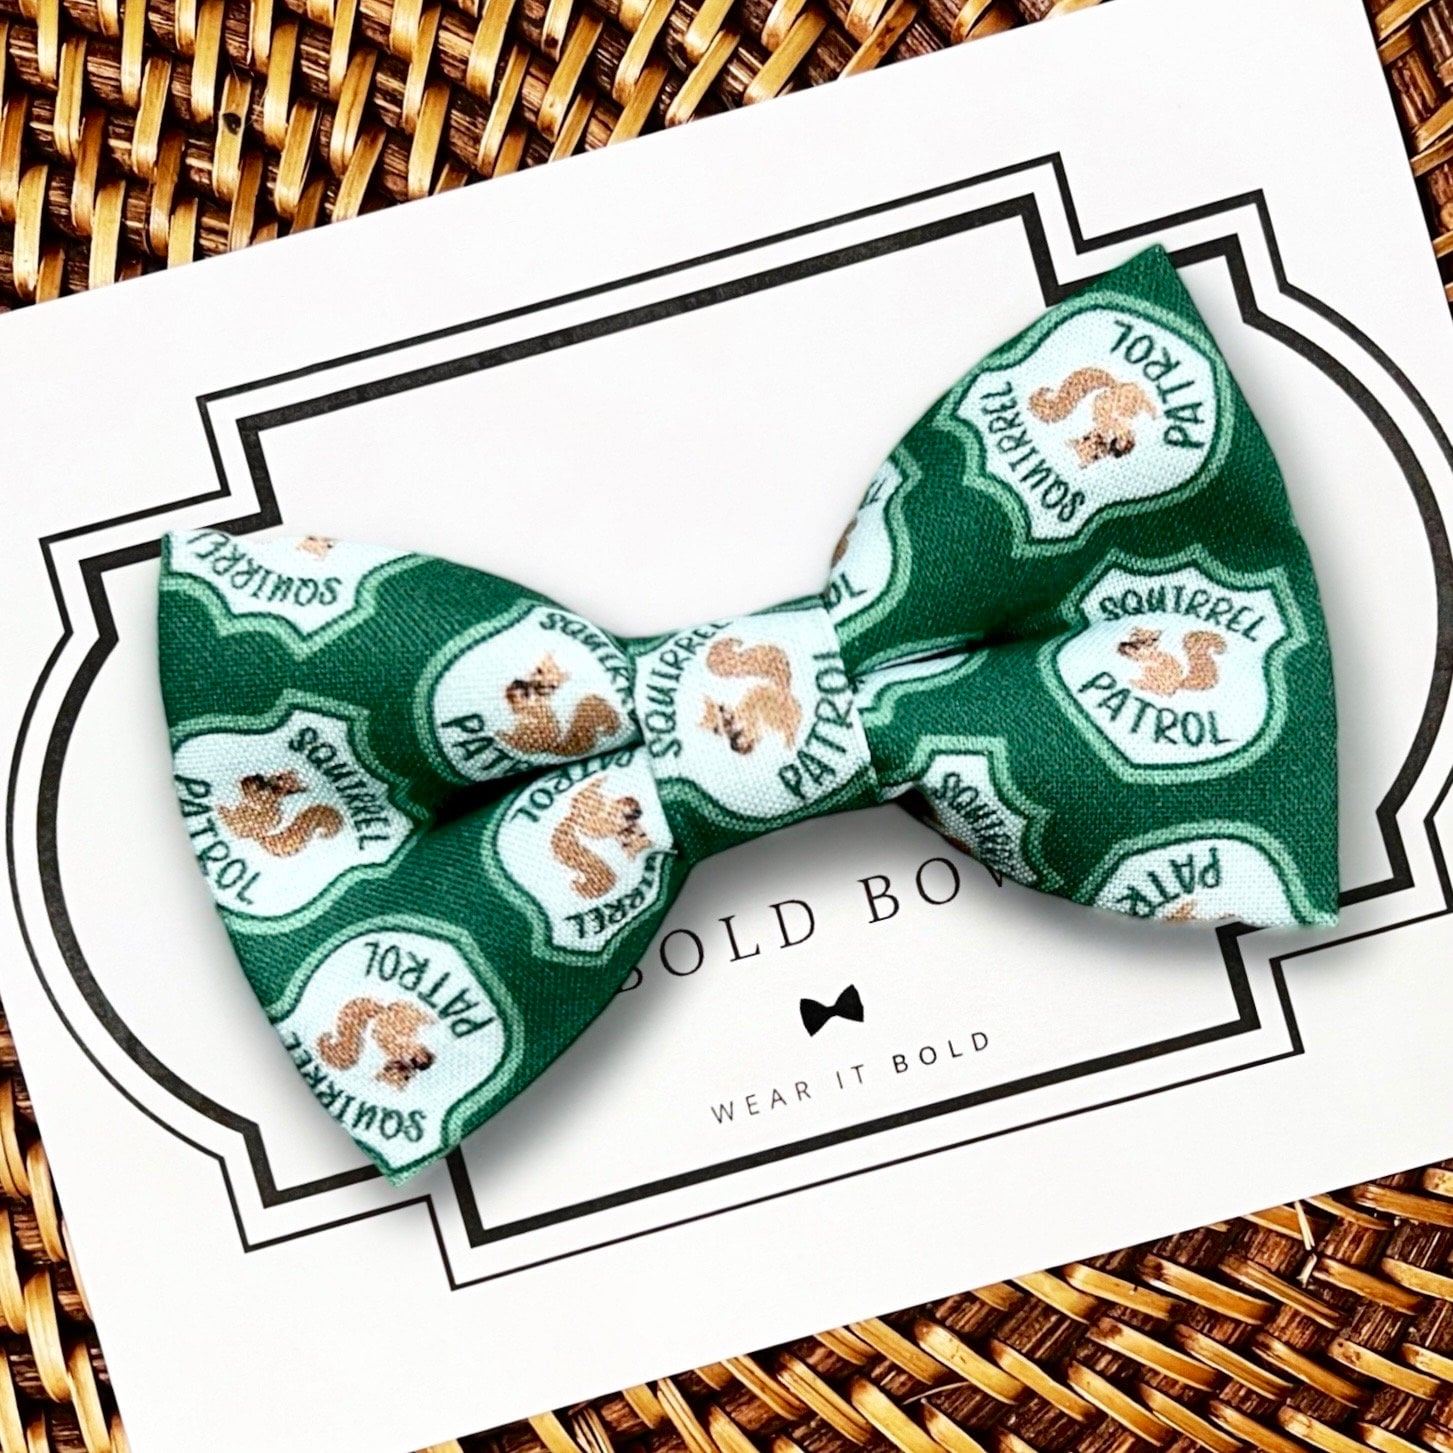 Squirrel Patrol Dog Bow Tie or Cat Bow Tie for Collar, Bow Tie for Dogs, Dog Bowtie, Bow Ties, Dog Accessories, Dog Birthday Gift, Dog Gift